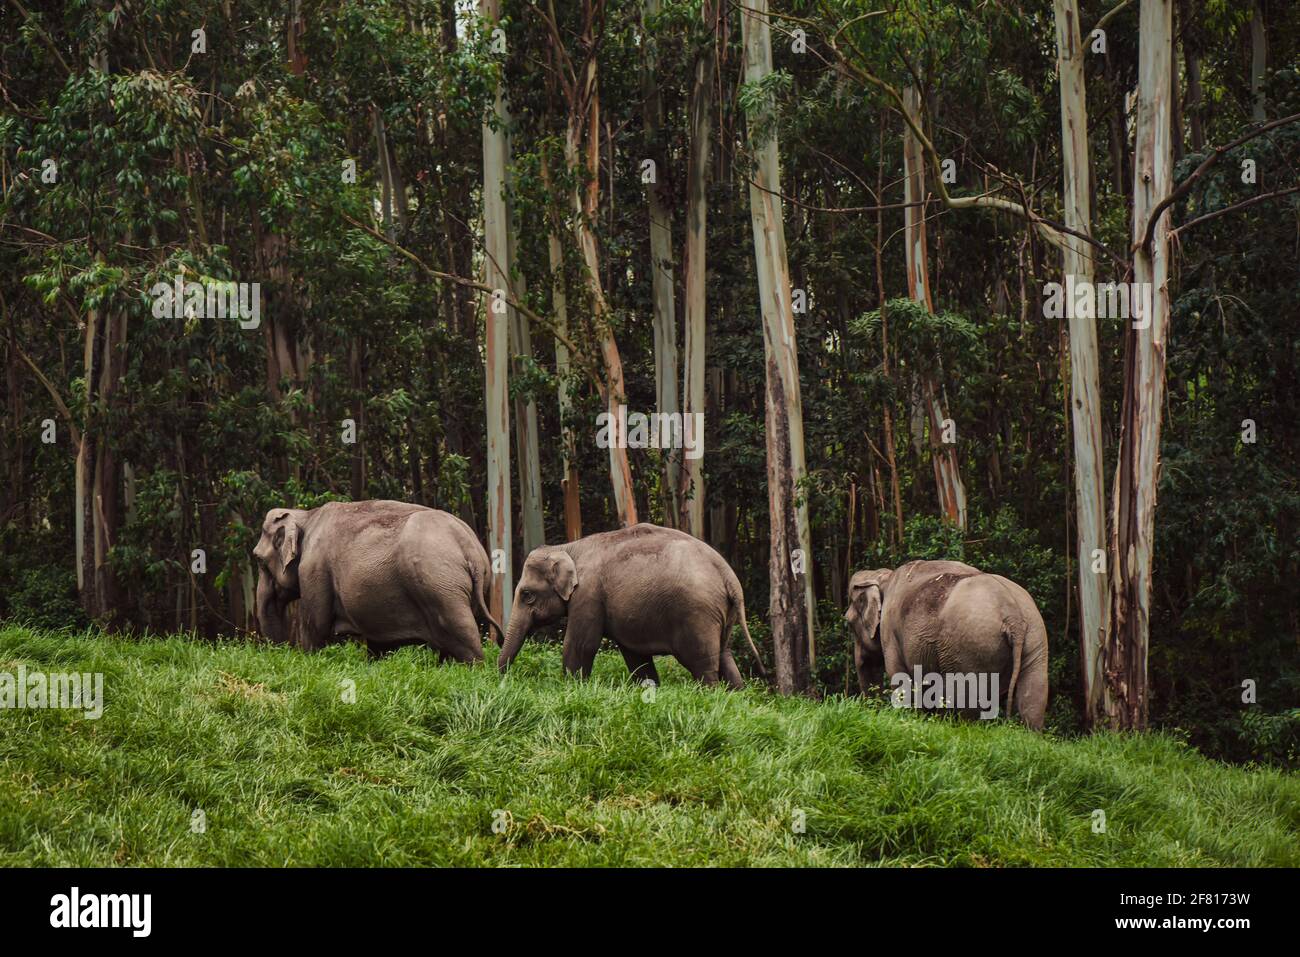 Elephant family in Periyar national park walking near the forest India, Munnar Stock Photo